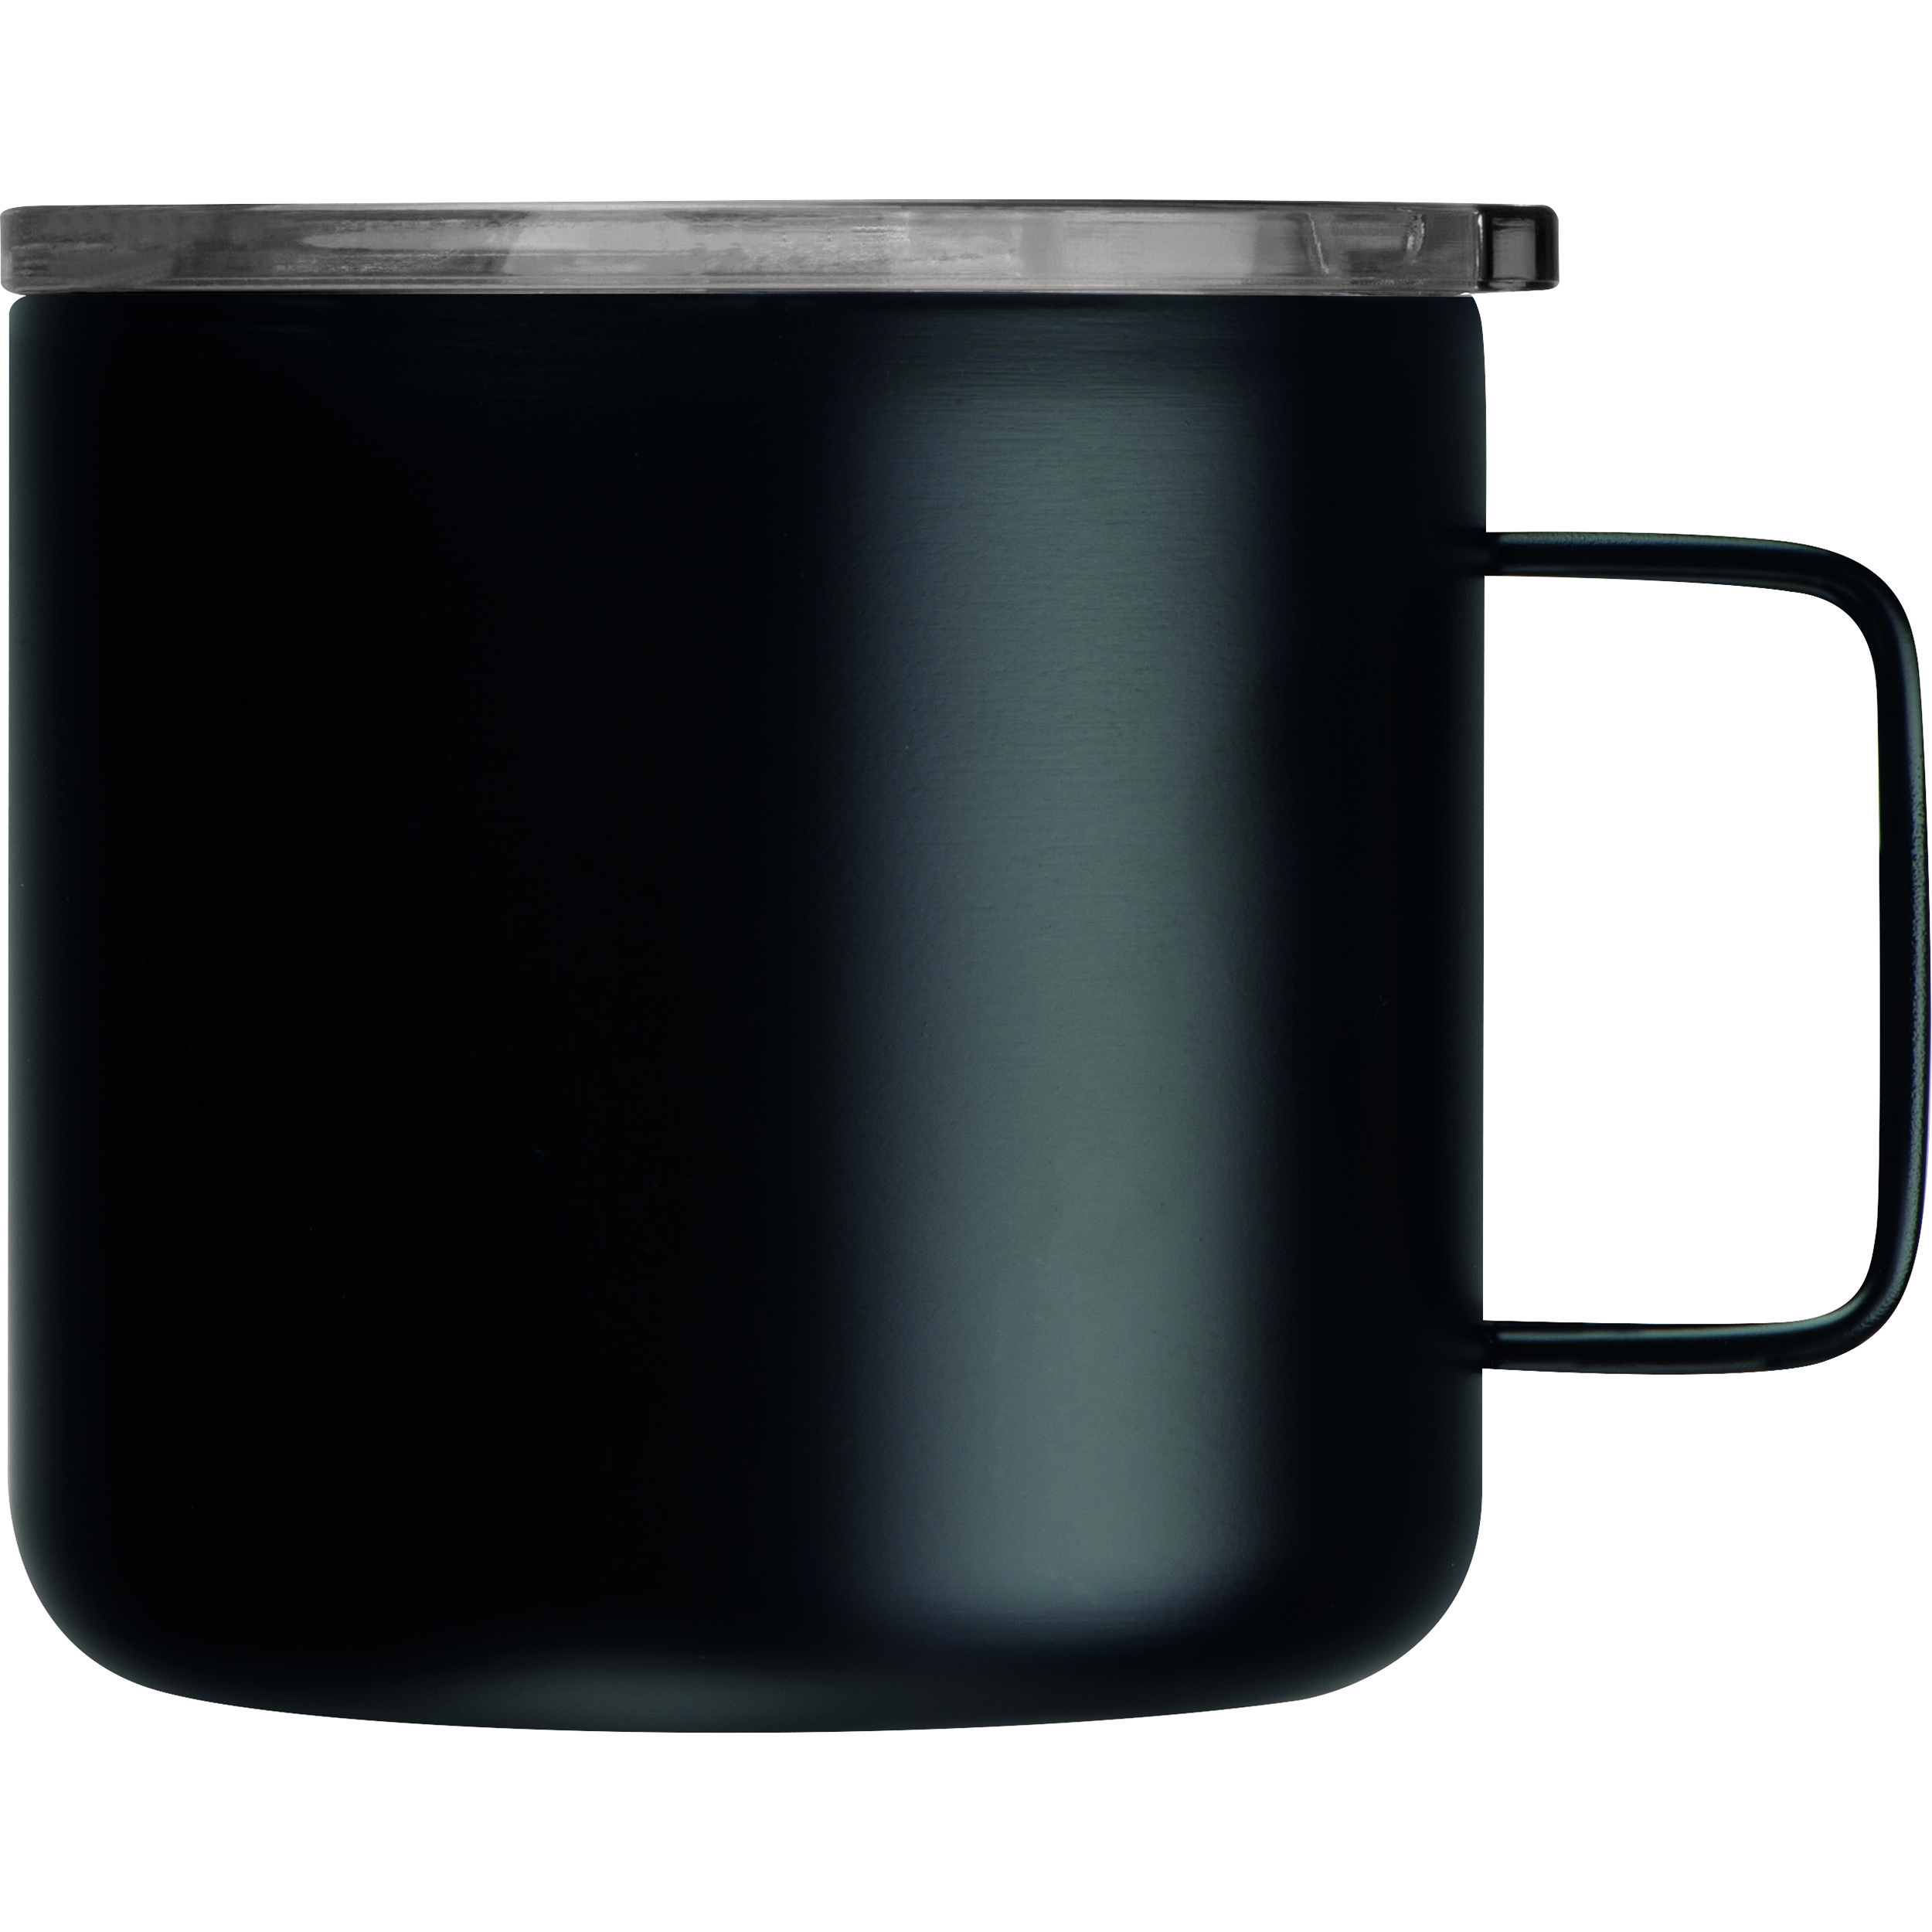 Stainless steel drinking cup